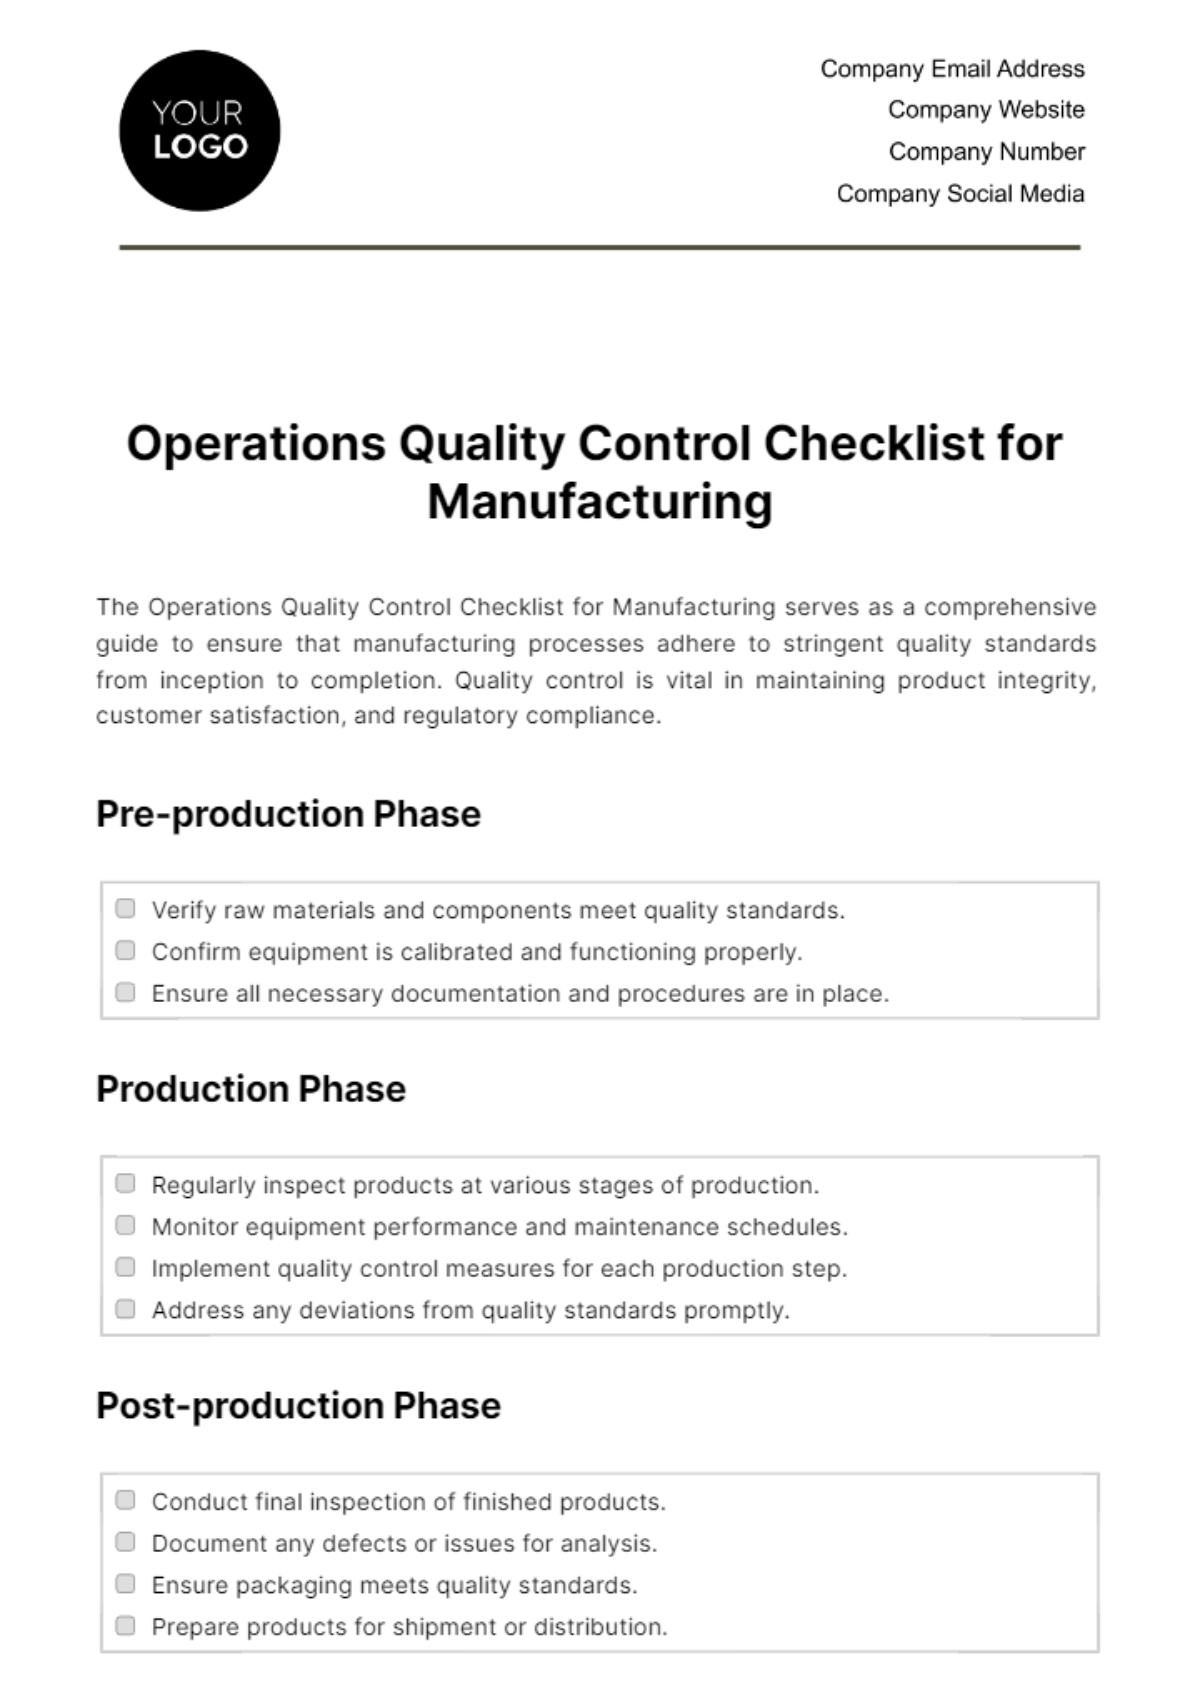 Free Operations Quality Control Checklist for Manufacturing Template